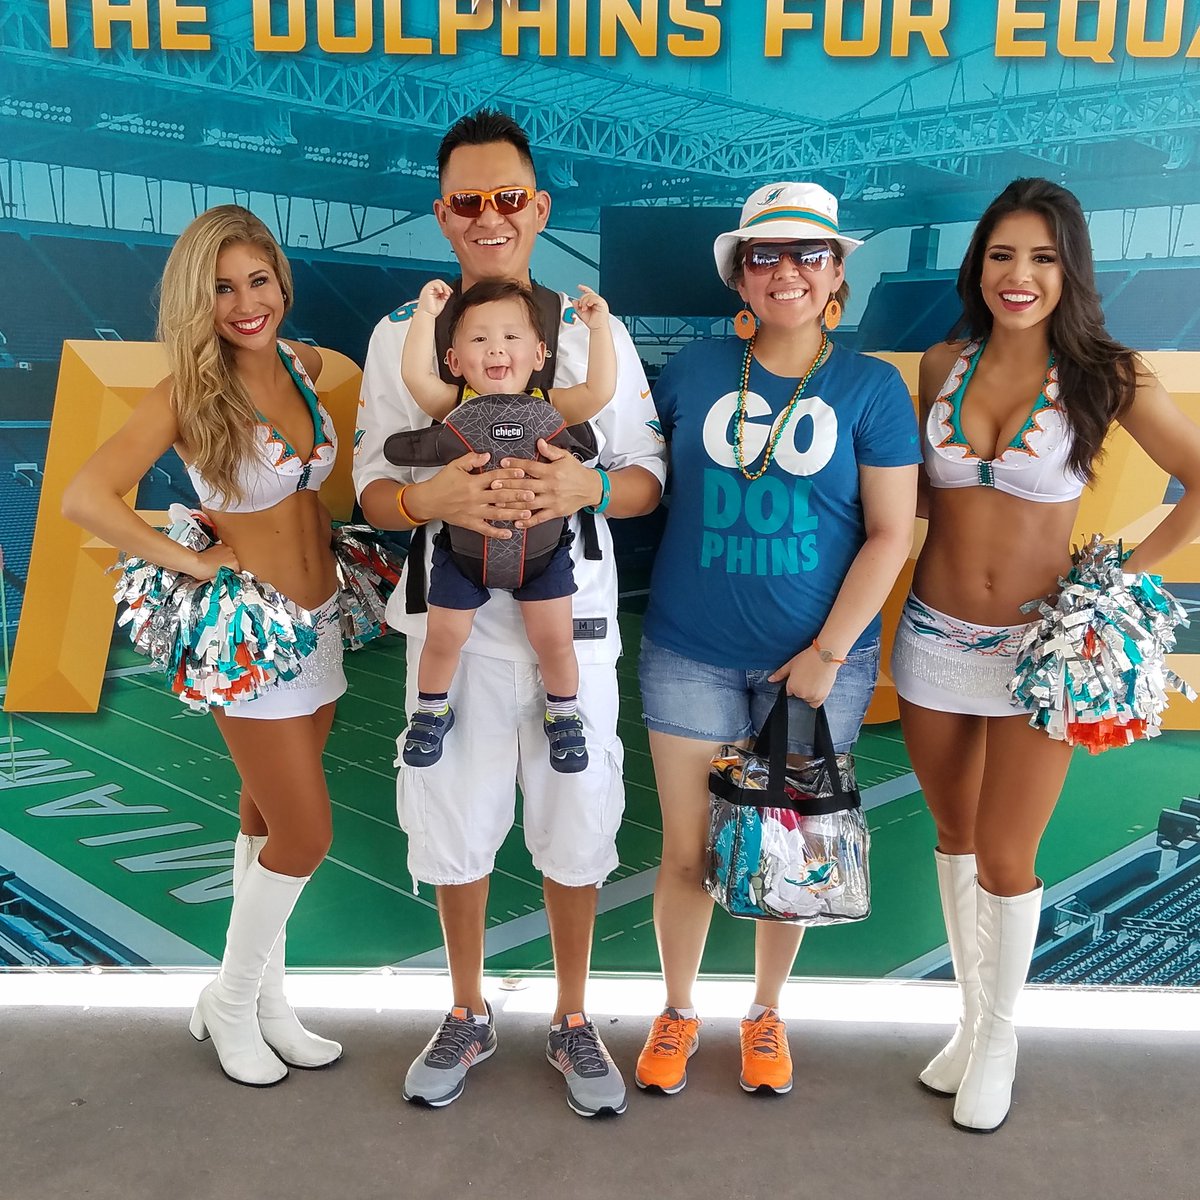 Thank you @MDCheer @MDC_JessicaC  Morgan  ... my Son was very happy to  meet you  👶😅😂